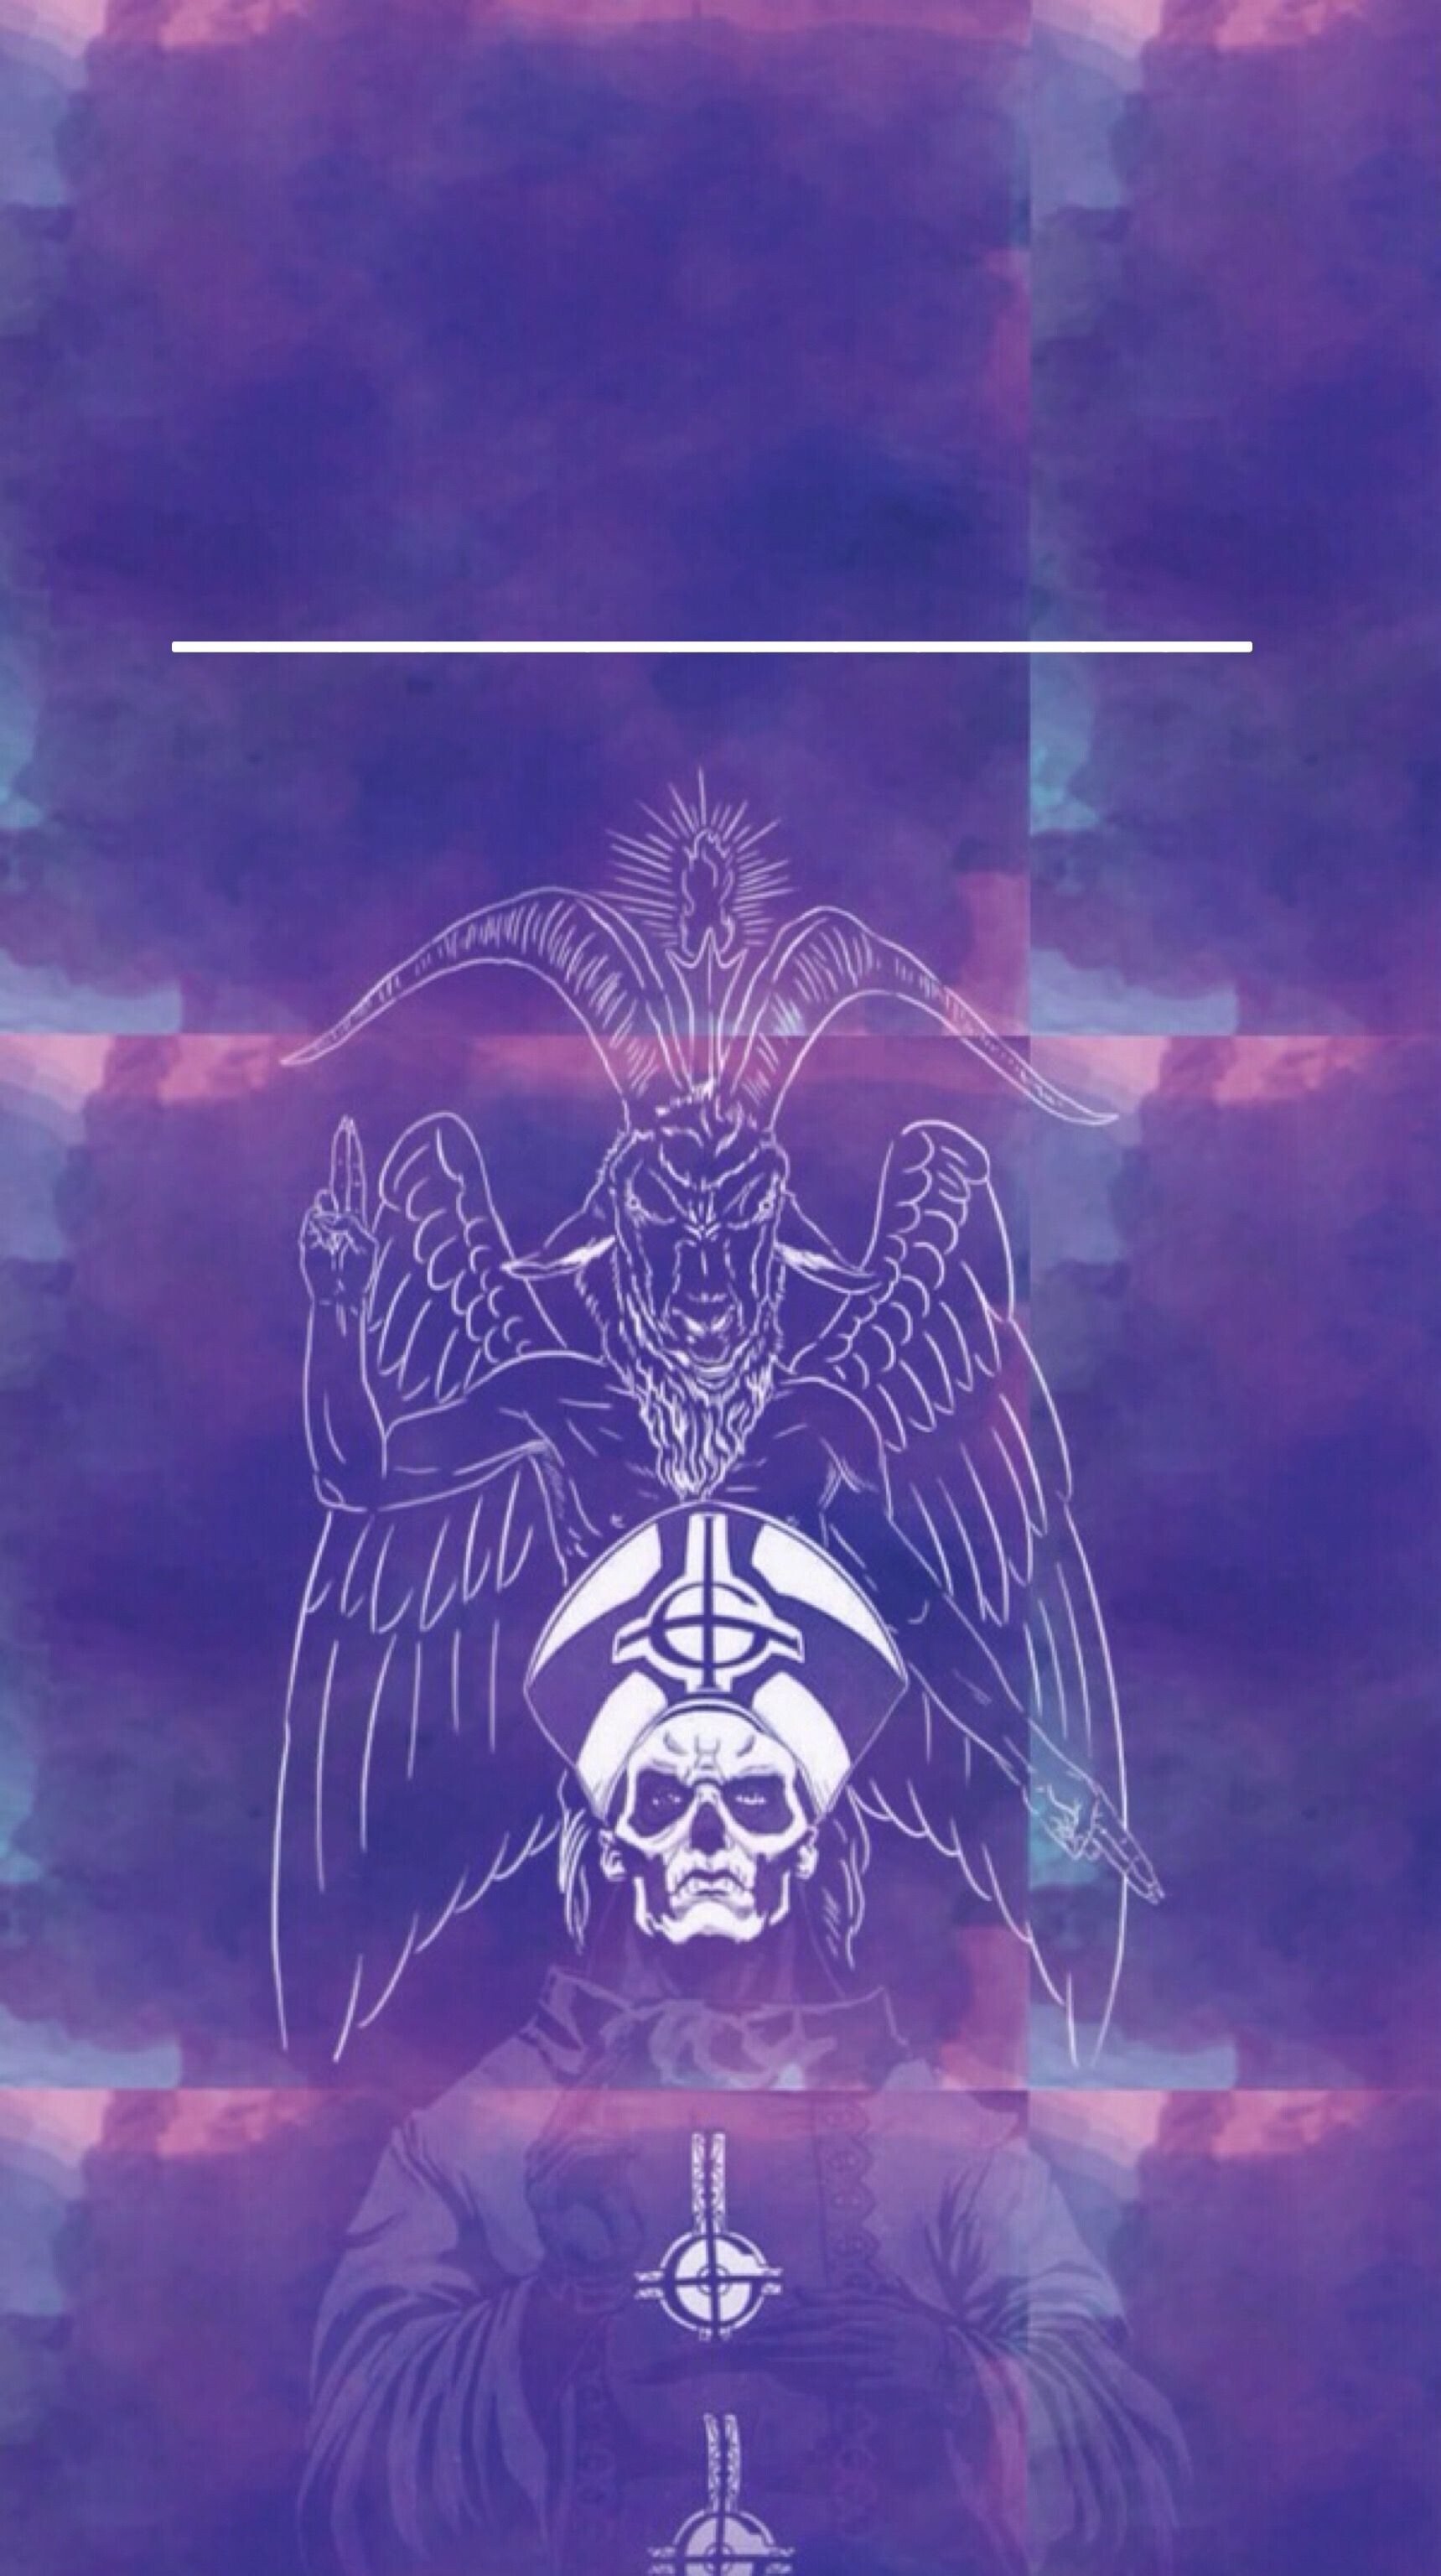 Ghost (Band): The group that mimic the Roman Catholic Church, but have reversed the image to worship Satan instead of the Holy Trinity. 1720x3080 HD Background.